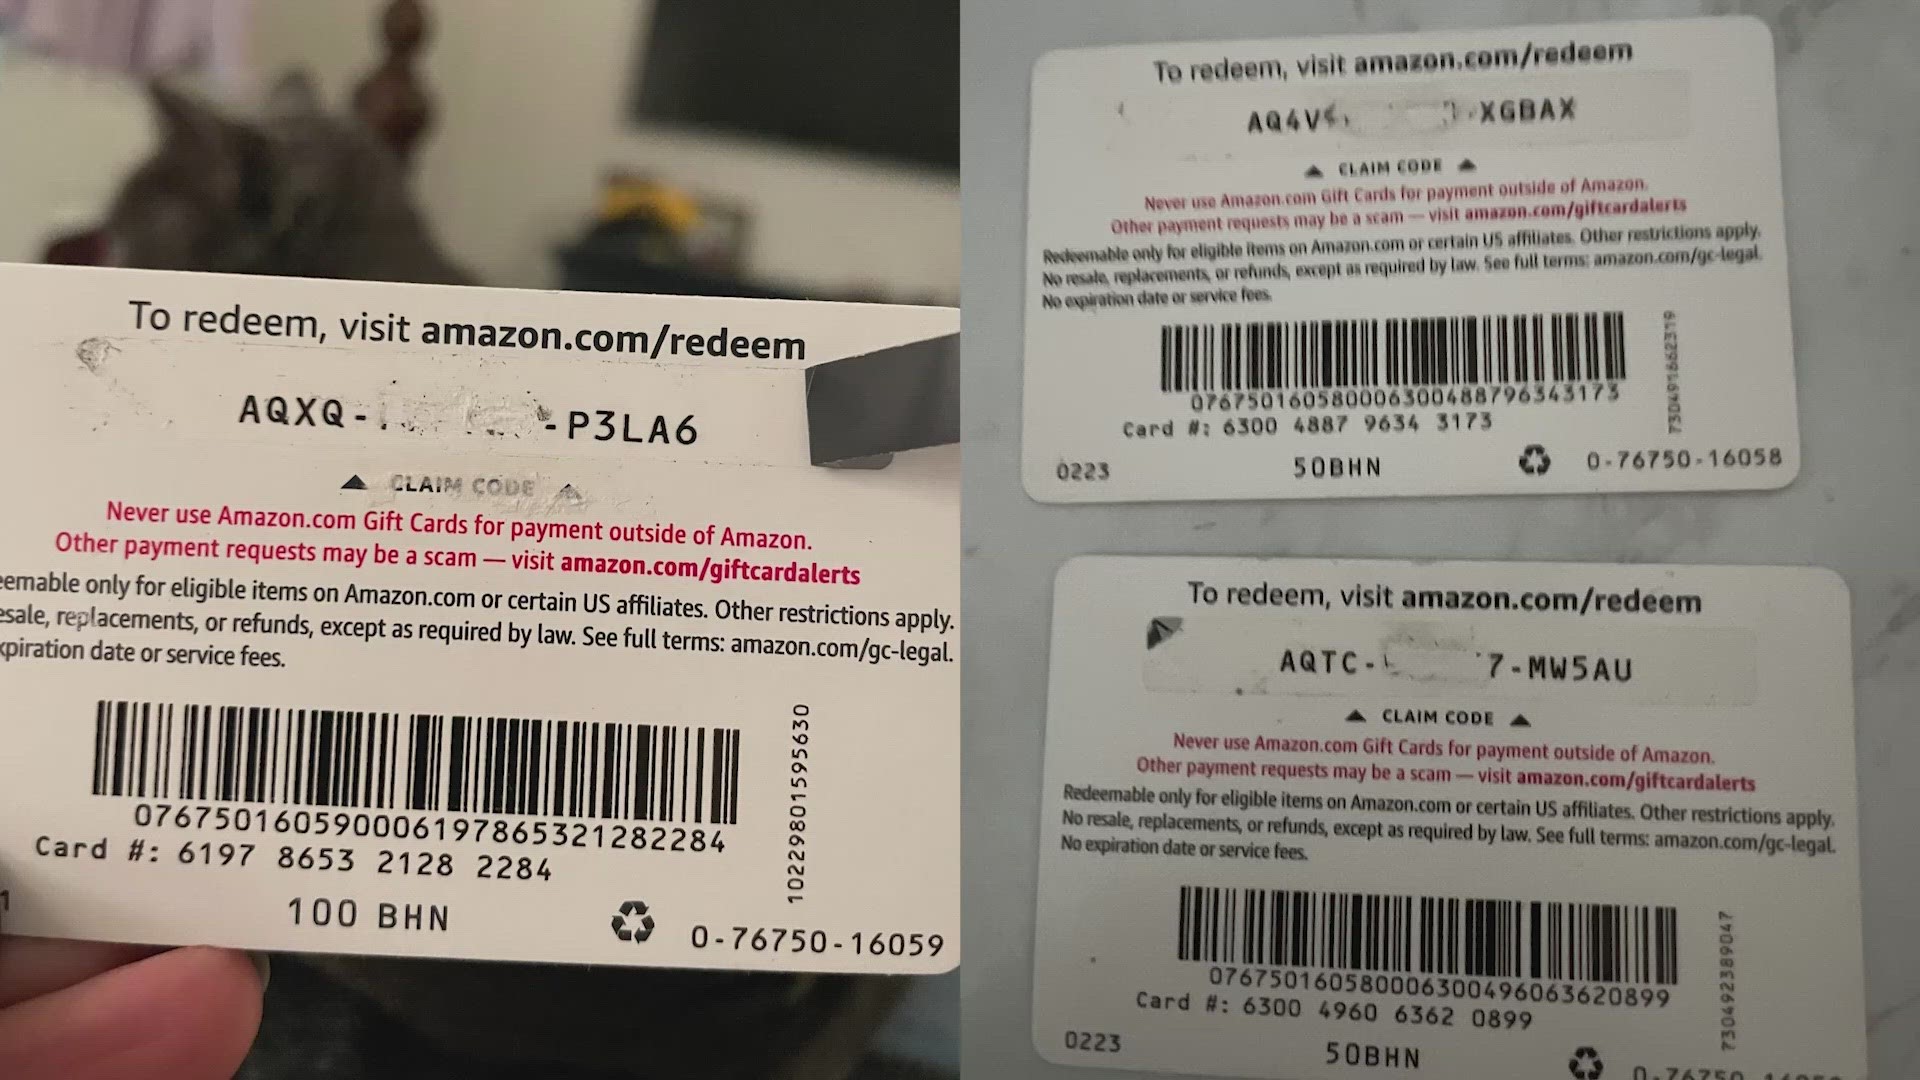 A Houston grandmother said the Amazon cards she gave her grandkids were already spent by the time they got them.